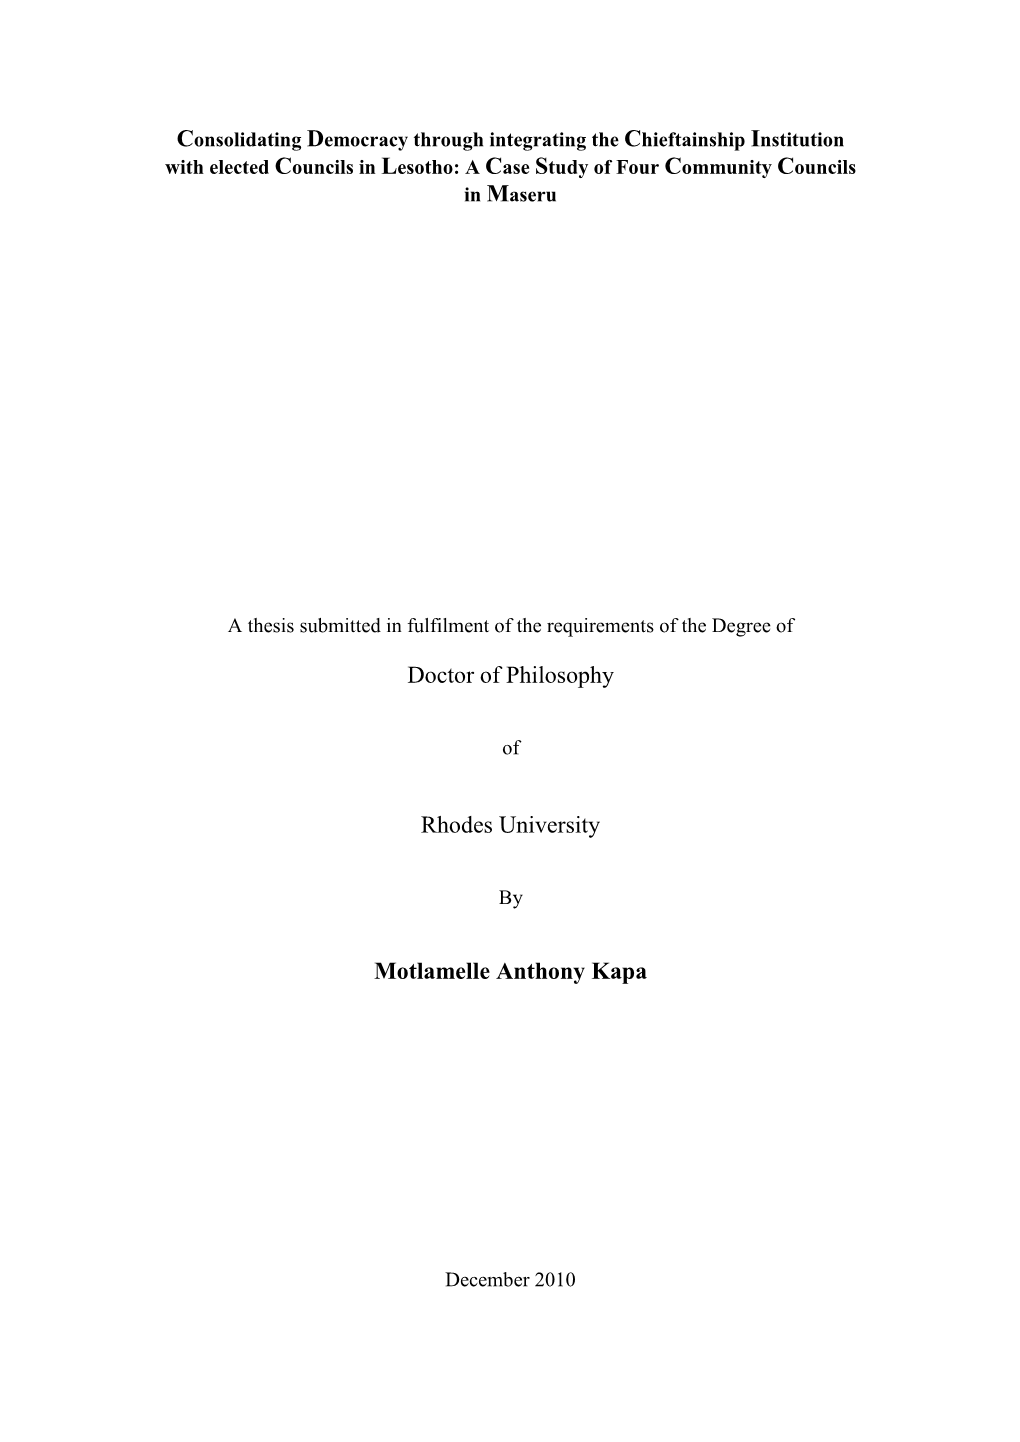 Chapter 2: Democracy, Democratic Consolidation, Chieftainship and Its